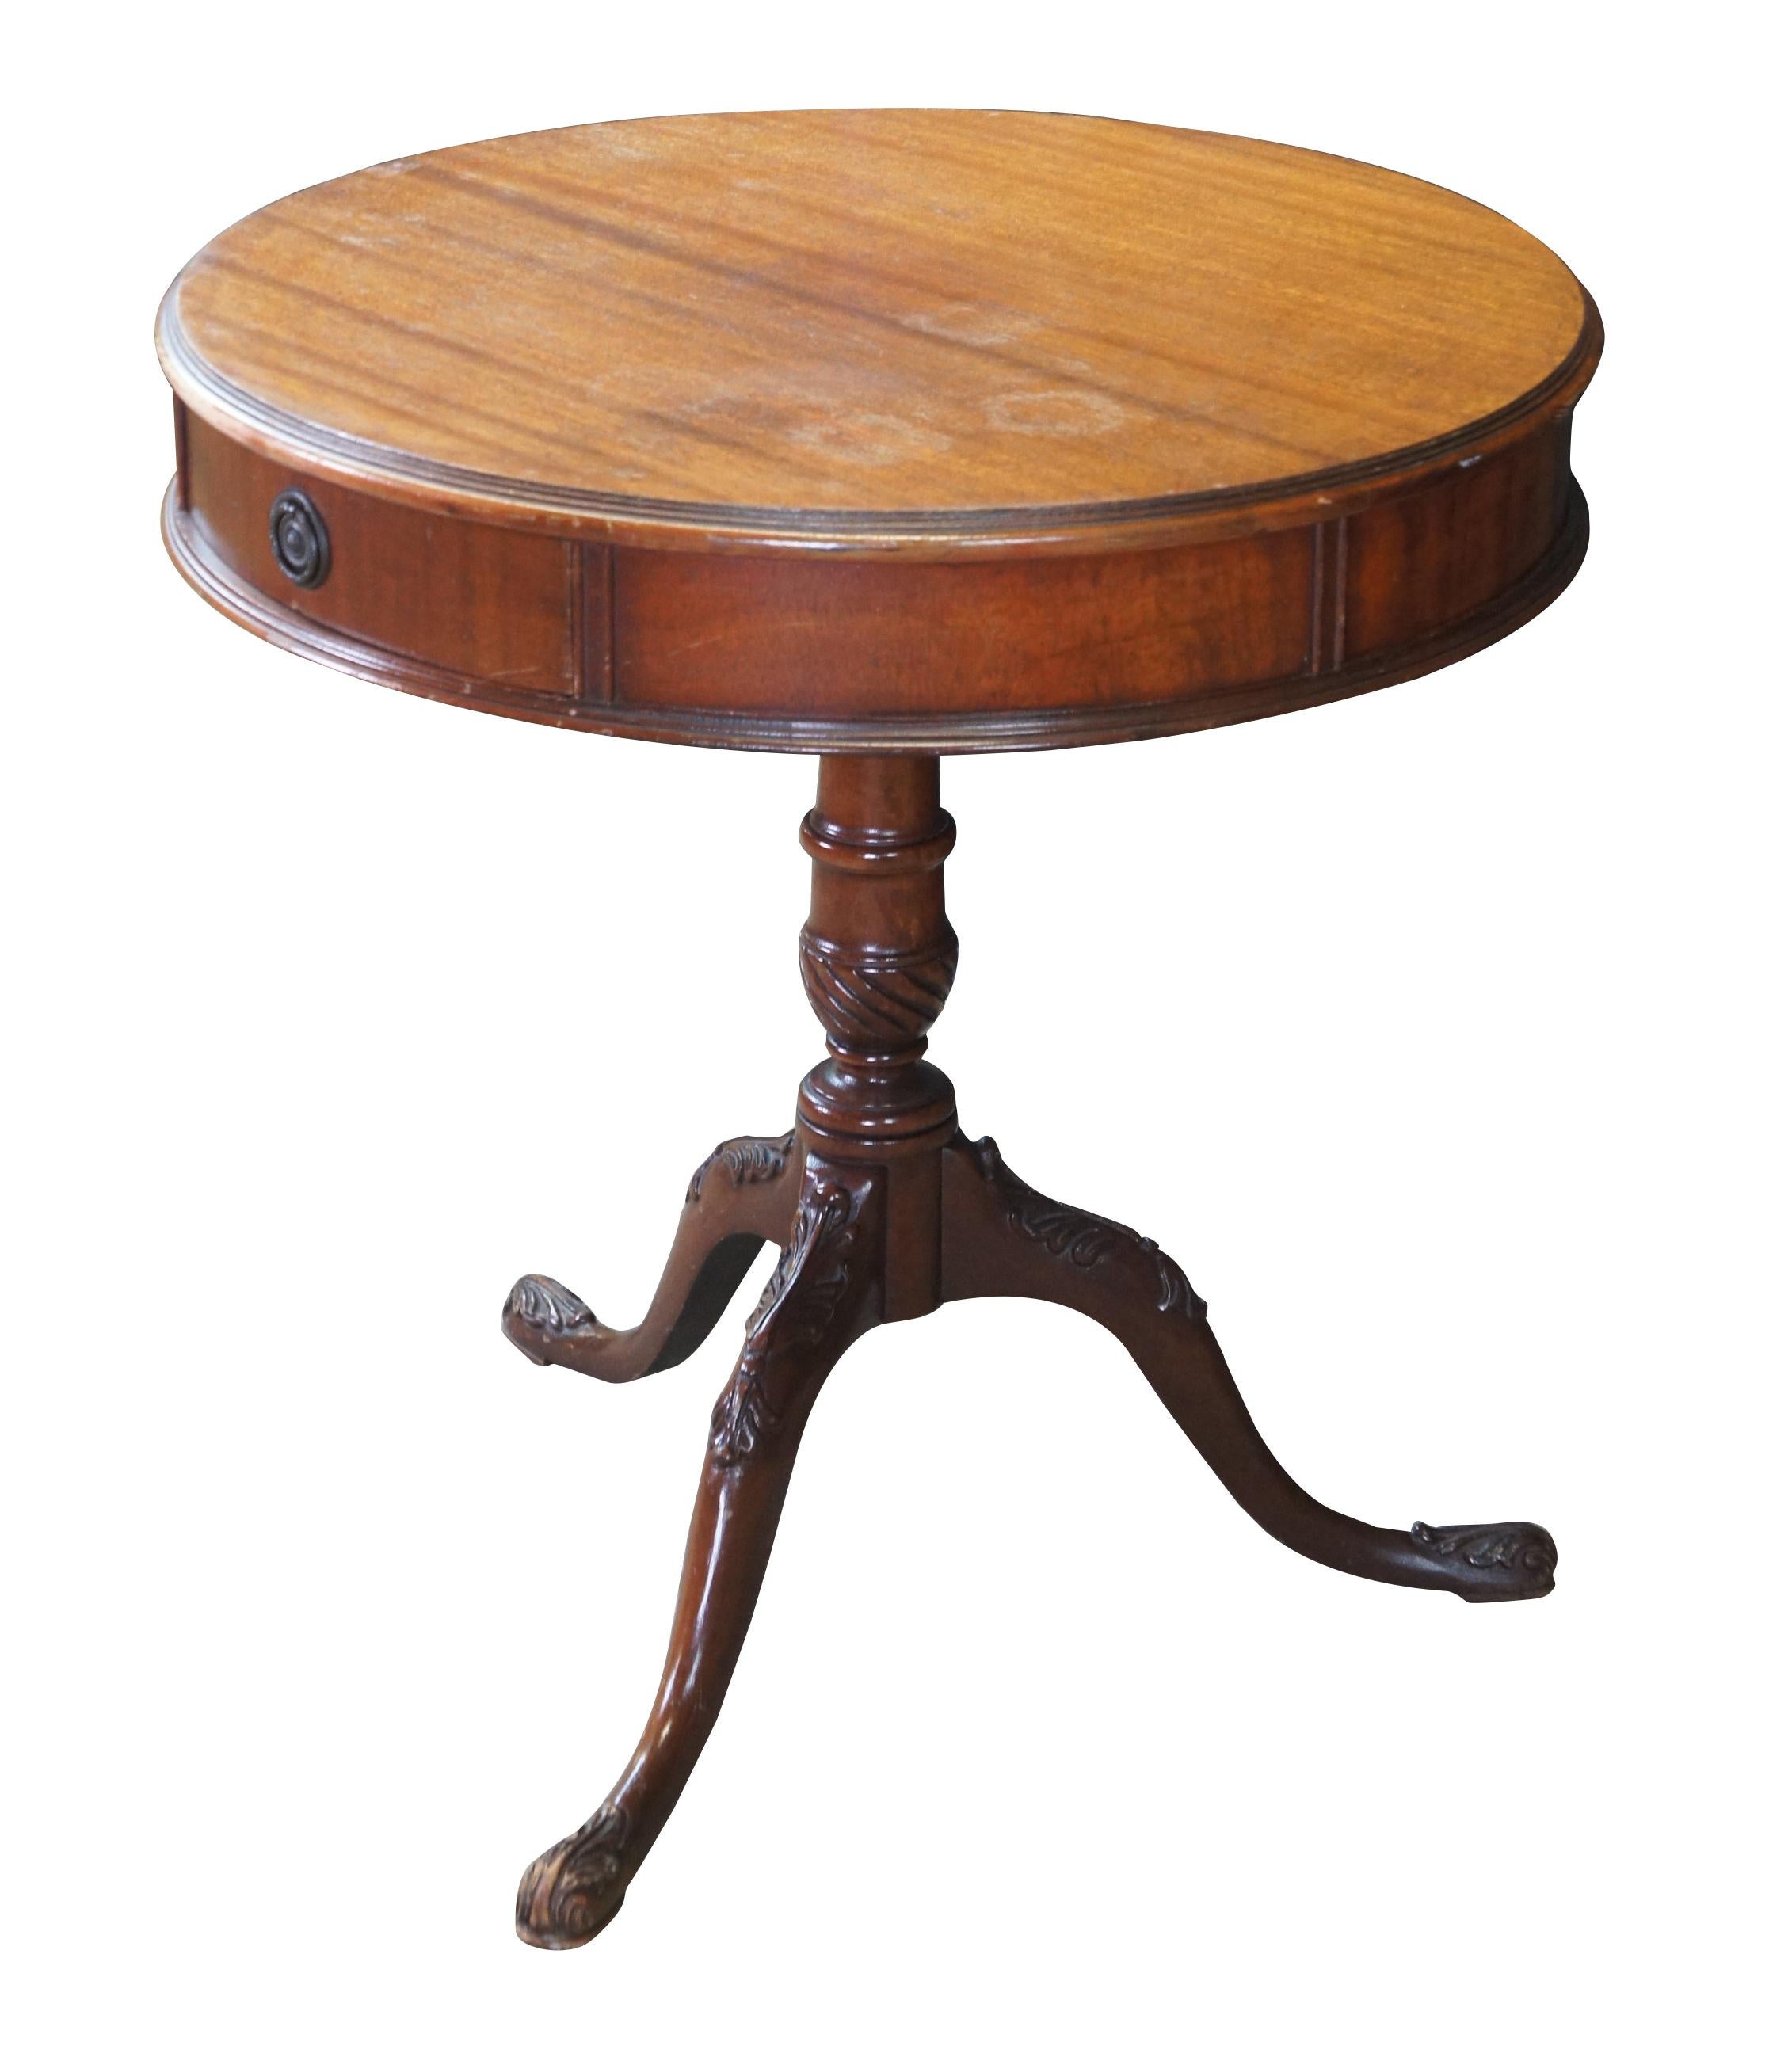 An antique Georgian style drum table.  Made from mahogany with rounded top featuring a drawer within the frieze over a turned and carved column leading to downswept tripod base with scrolled pad feet.  

Dimensions:
25.5